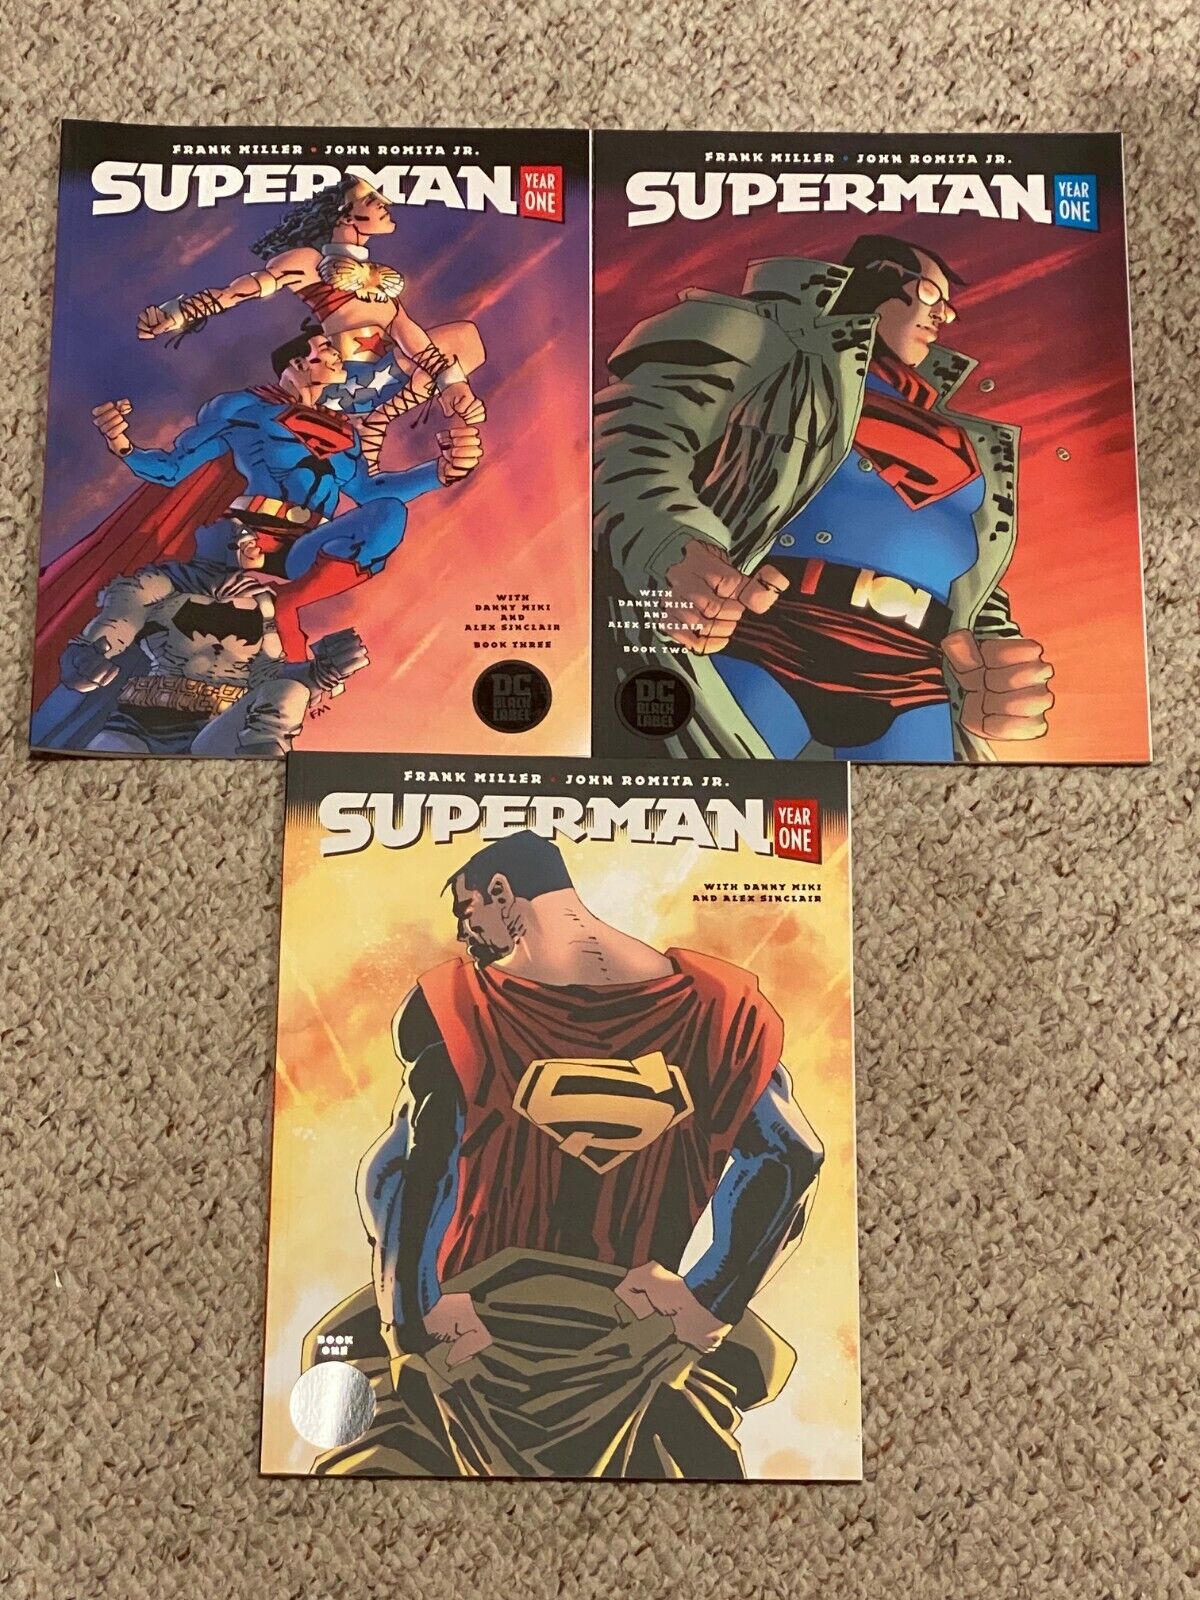 SUPERMAN YEAR ONE BOOKS #1-3 OVERSIZED ISSUES FRANK MILLER EXCELLENT CONDITION